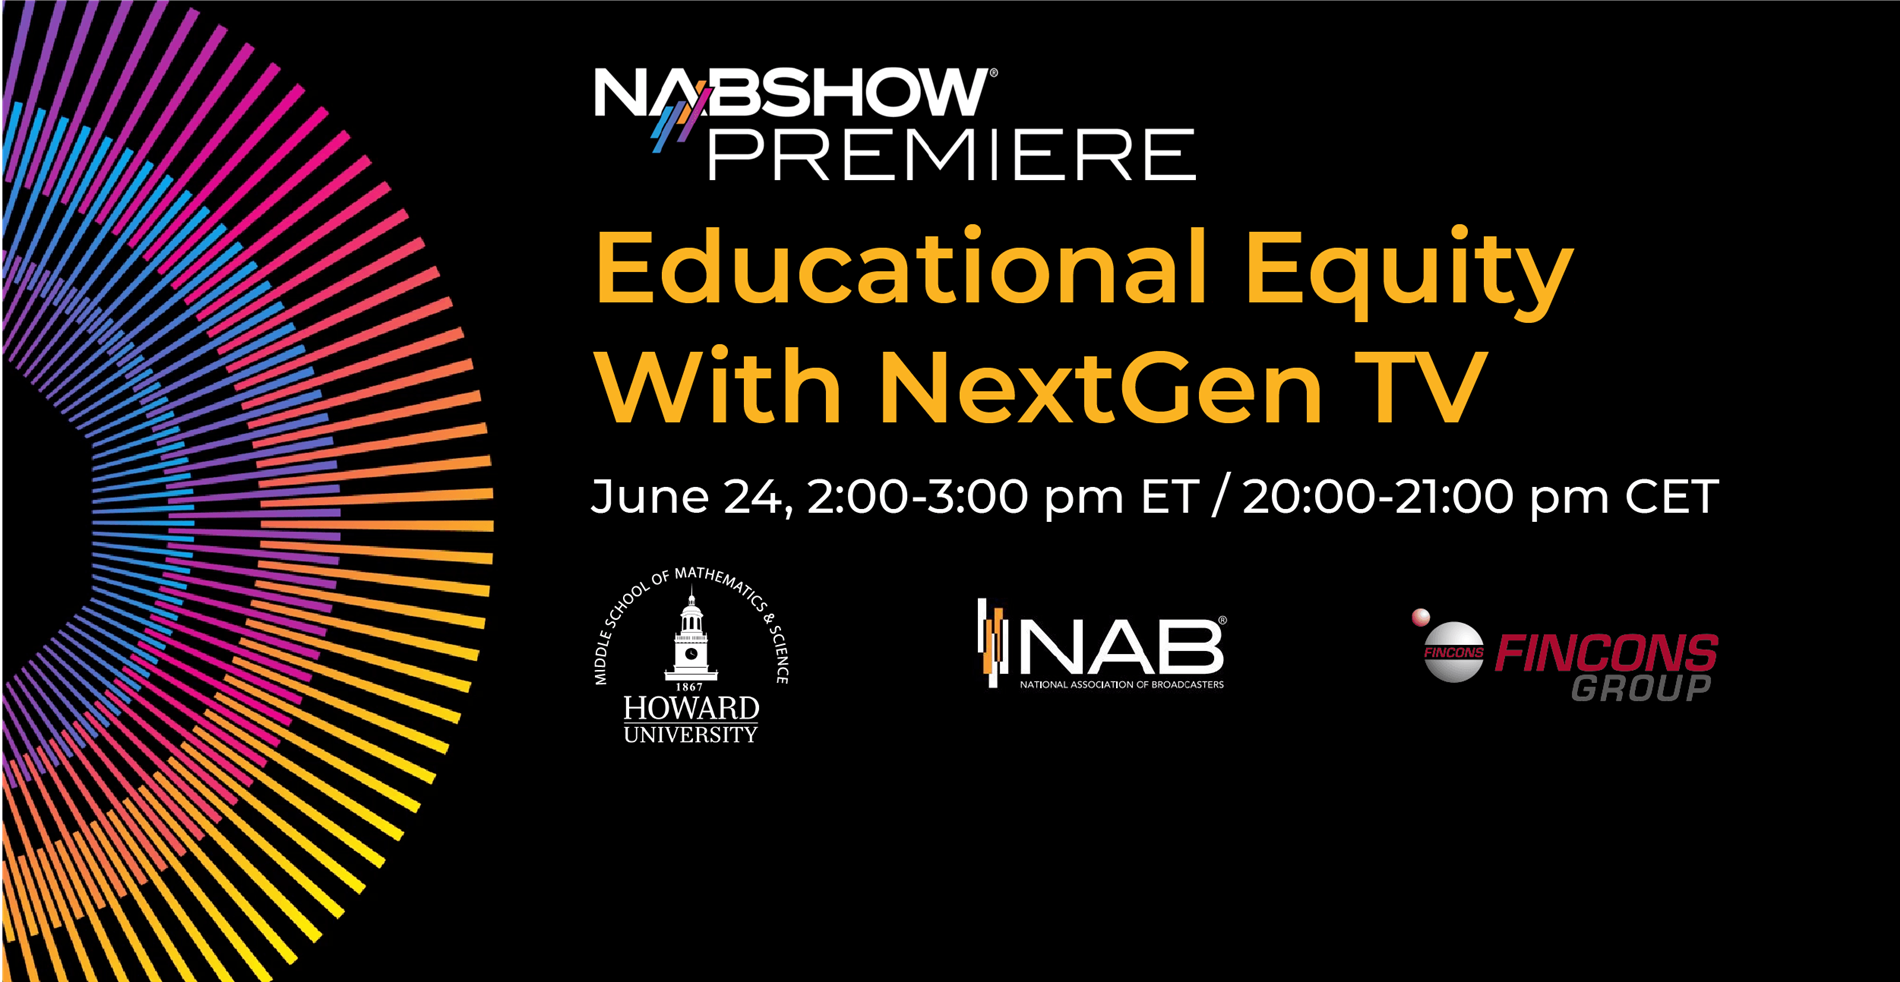 Next Gen TV Prototype Shows How Educational Equity Can Be Achieved For All Students